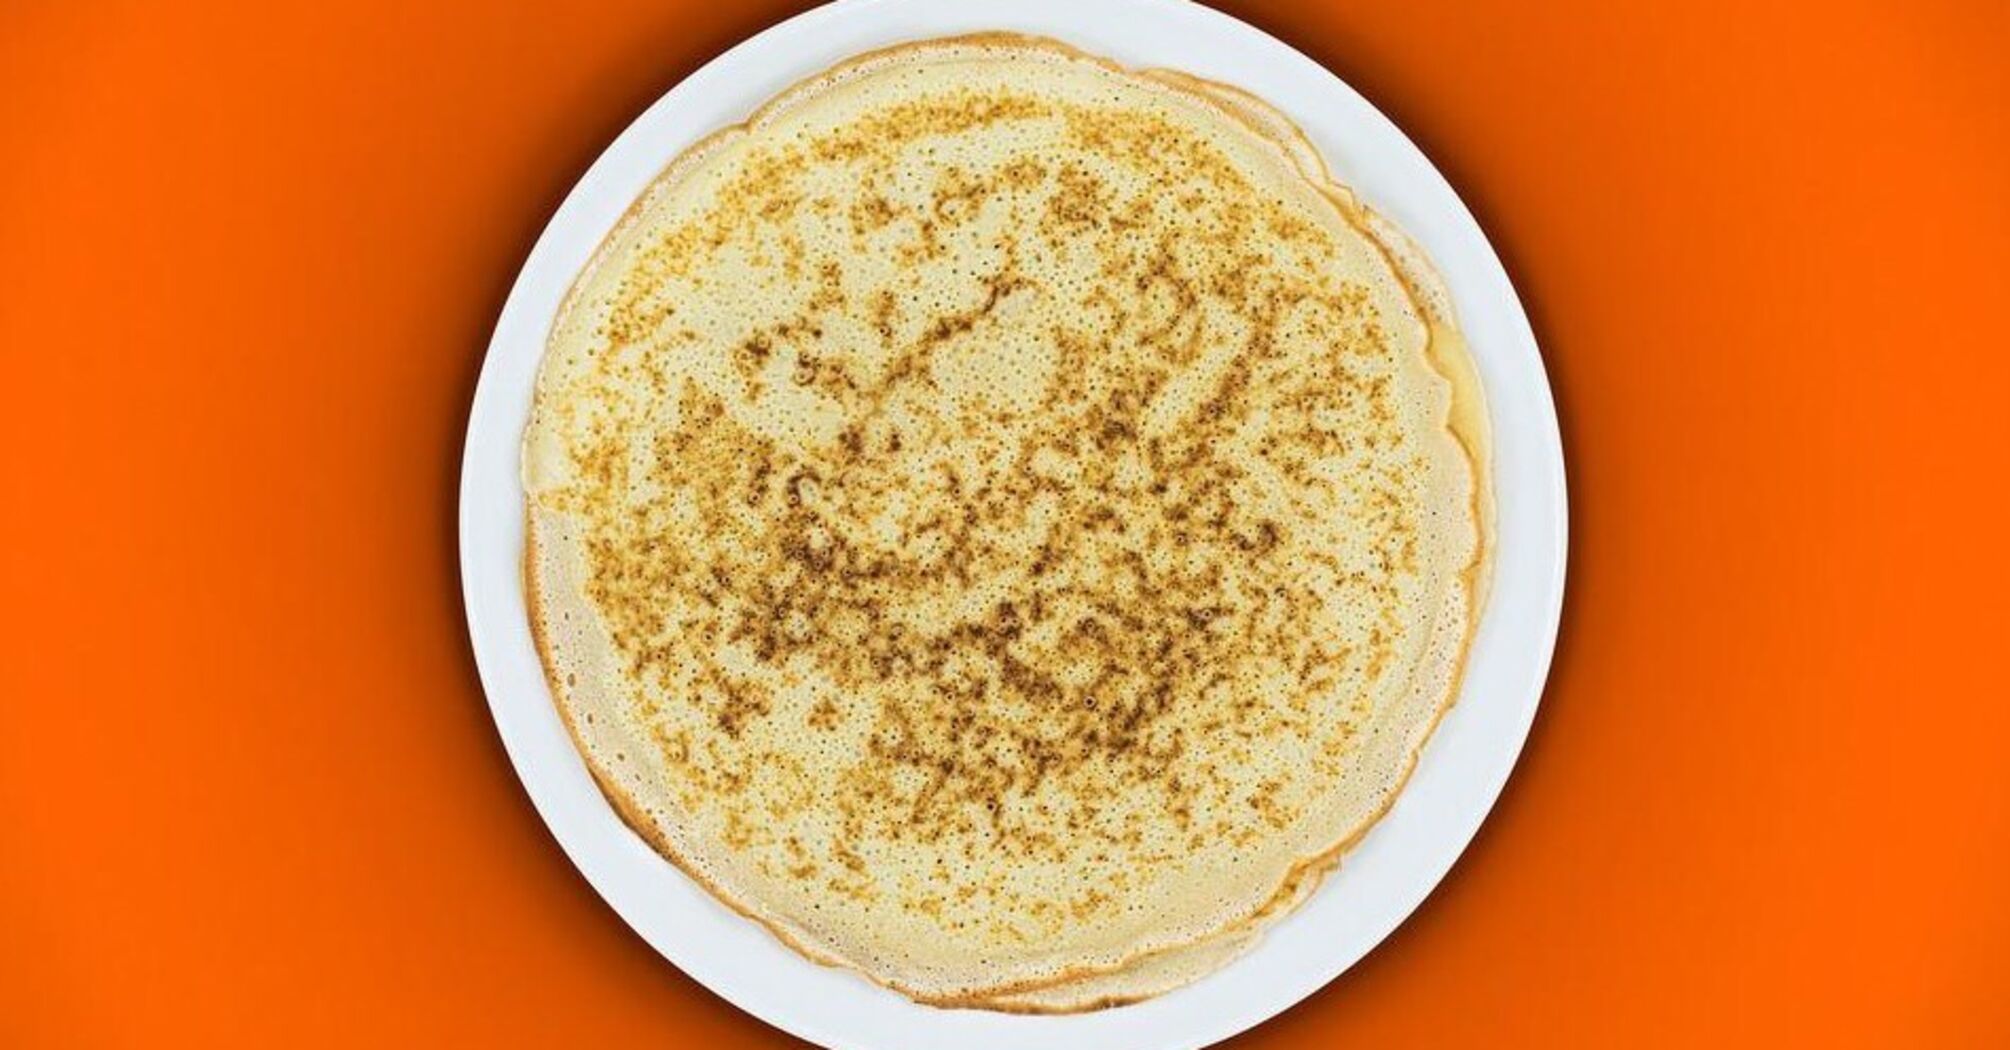 Thin pancakes without flour in 10 minutes: what to cook the dough on